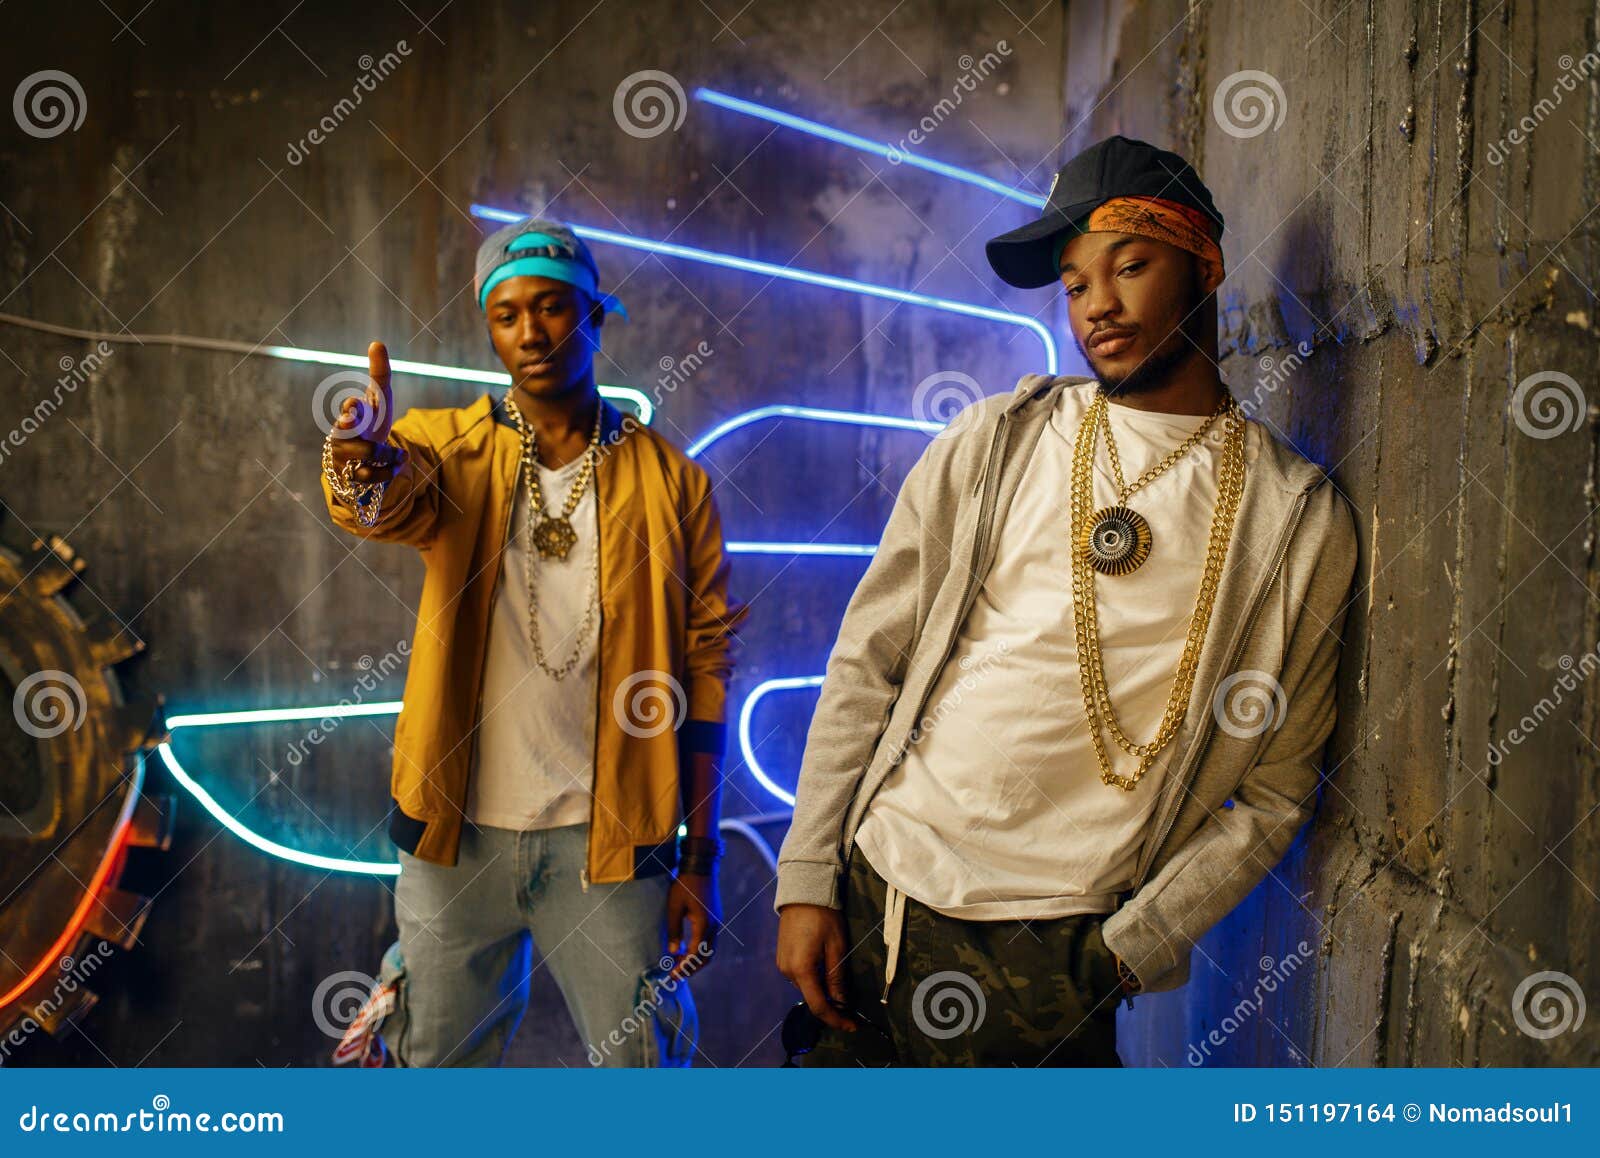 Two Black Rappers, Neon Lights on Background Stock Photo - Image of neon,  cool: 151197164